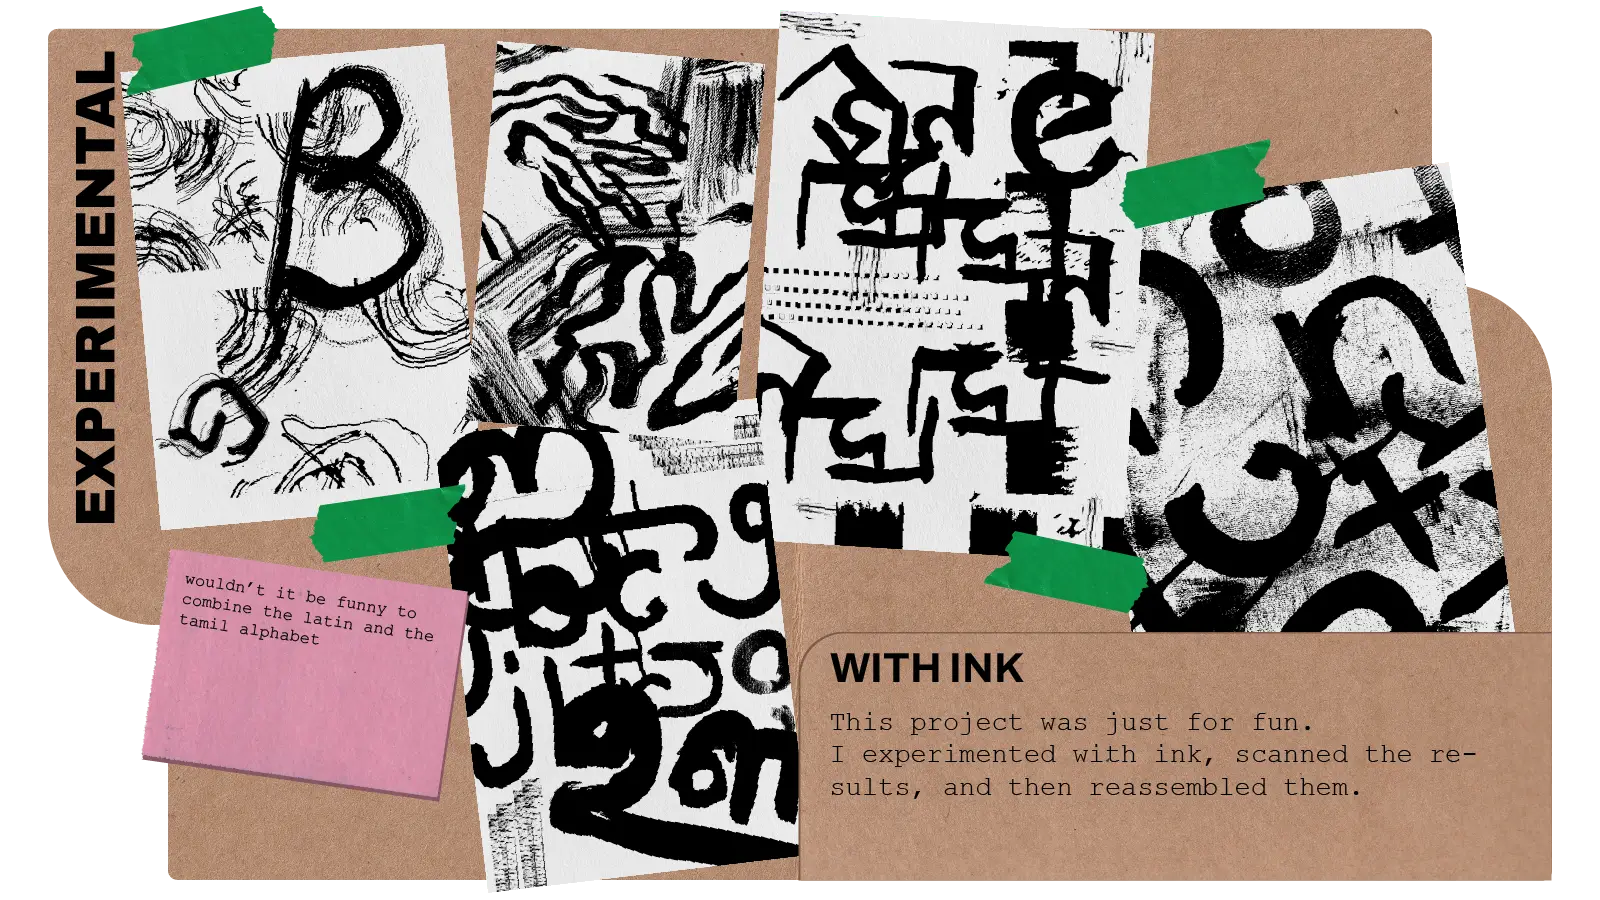 This project is about having fun with ink